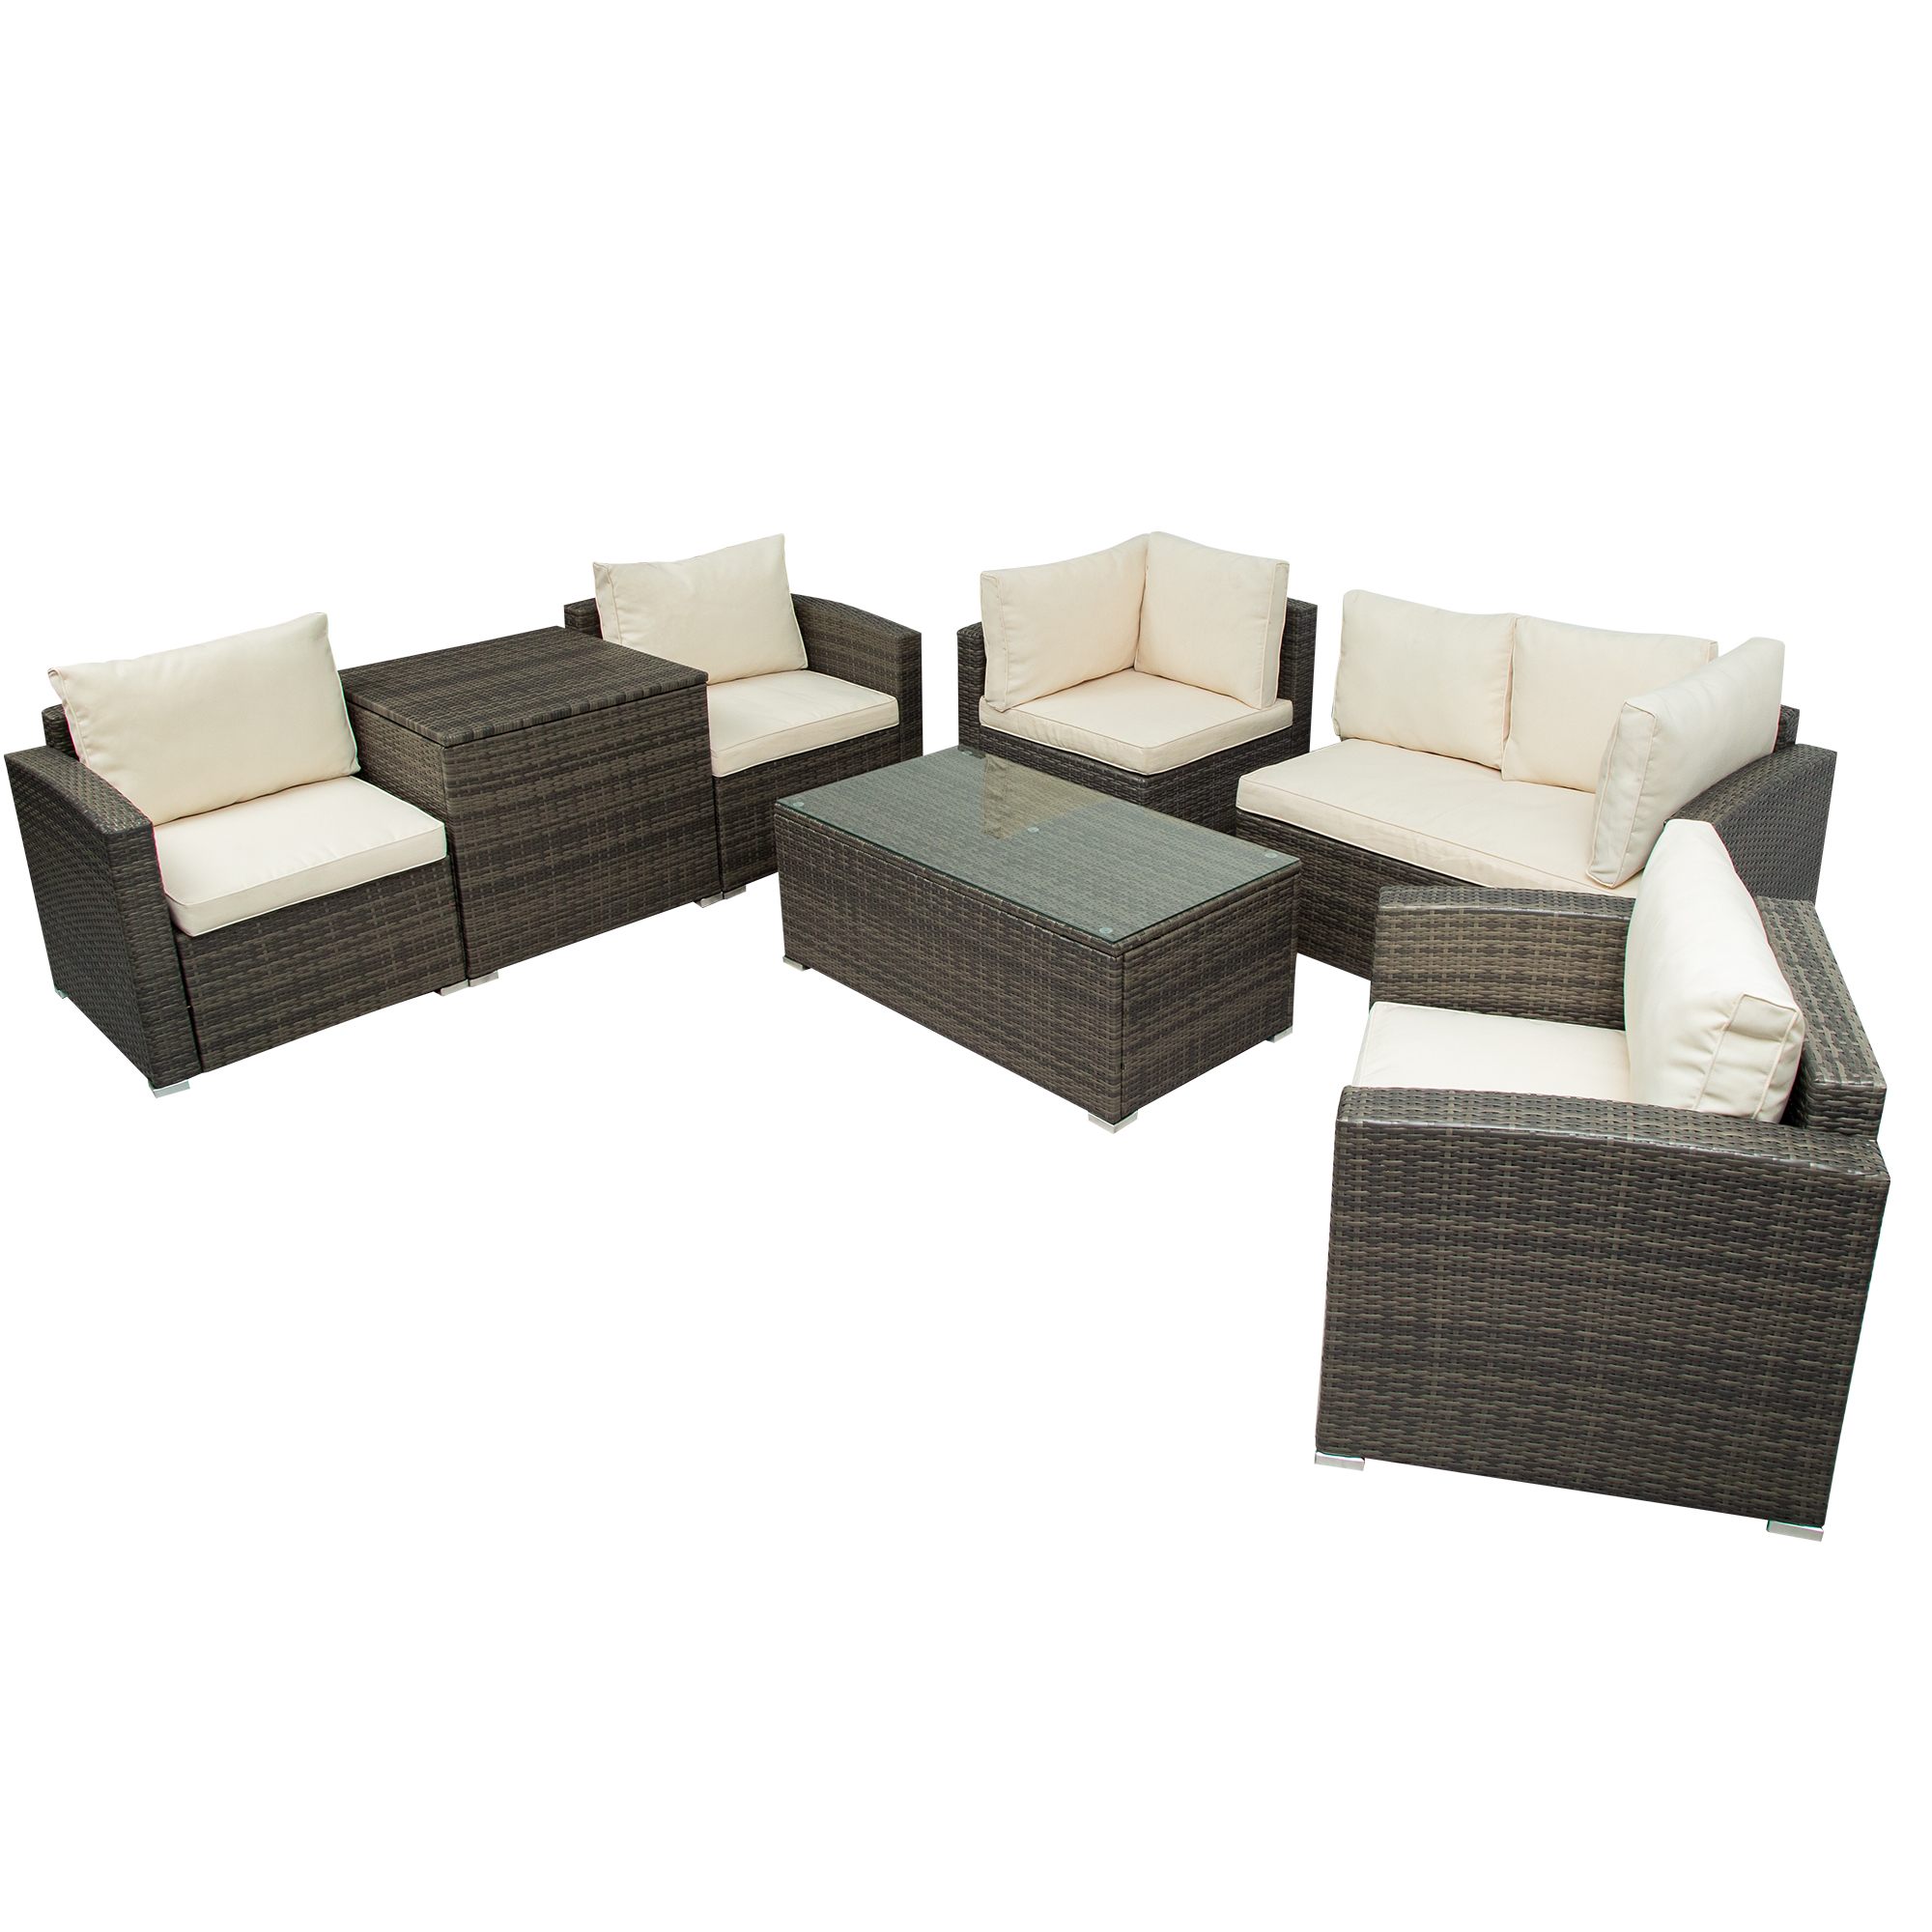 Patio Furniture Sets, 7-Piece Patio Wicker Sofa , Cushions, Chairs , a Loveseat , a Table and a Storage Box-CASAINC